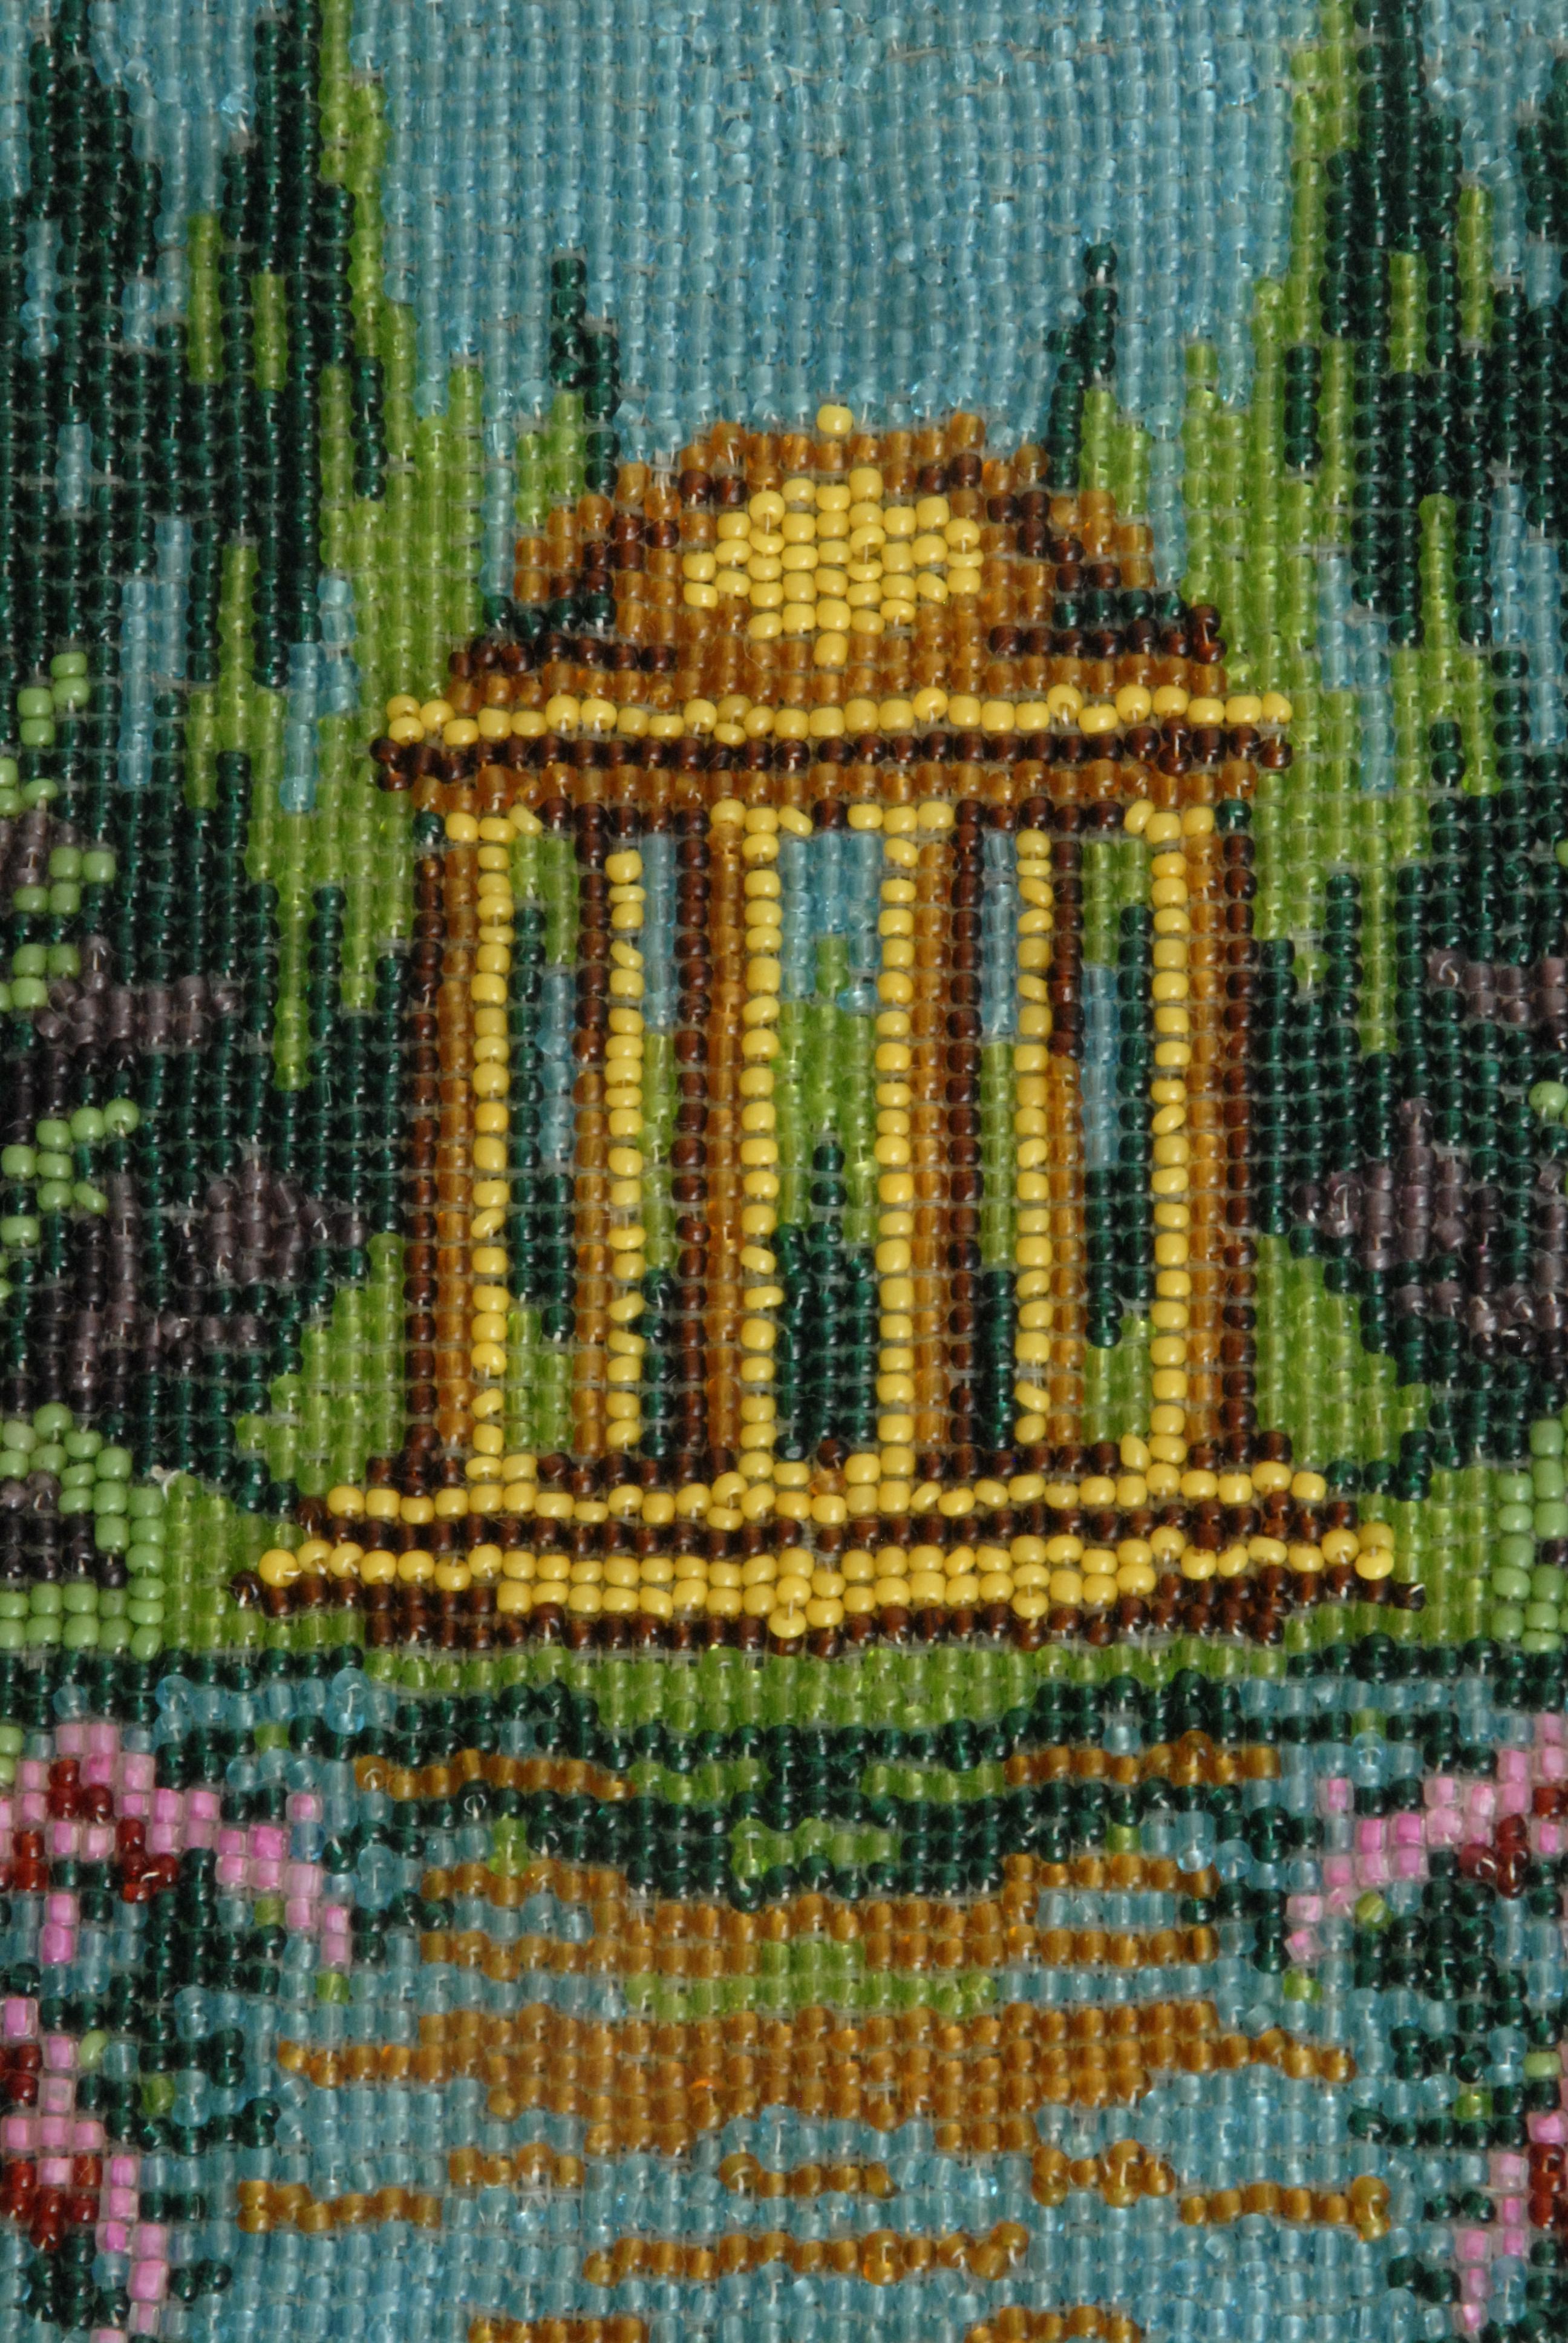 Bright and clear beaded bag of a Classical Rotunda set on the edge of a lake edged with flowering trees on either side against of duck egg blue sky.
In superb condition with perhaps 2 or 3 of the small glass beads missing out of a total of